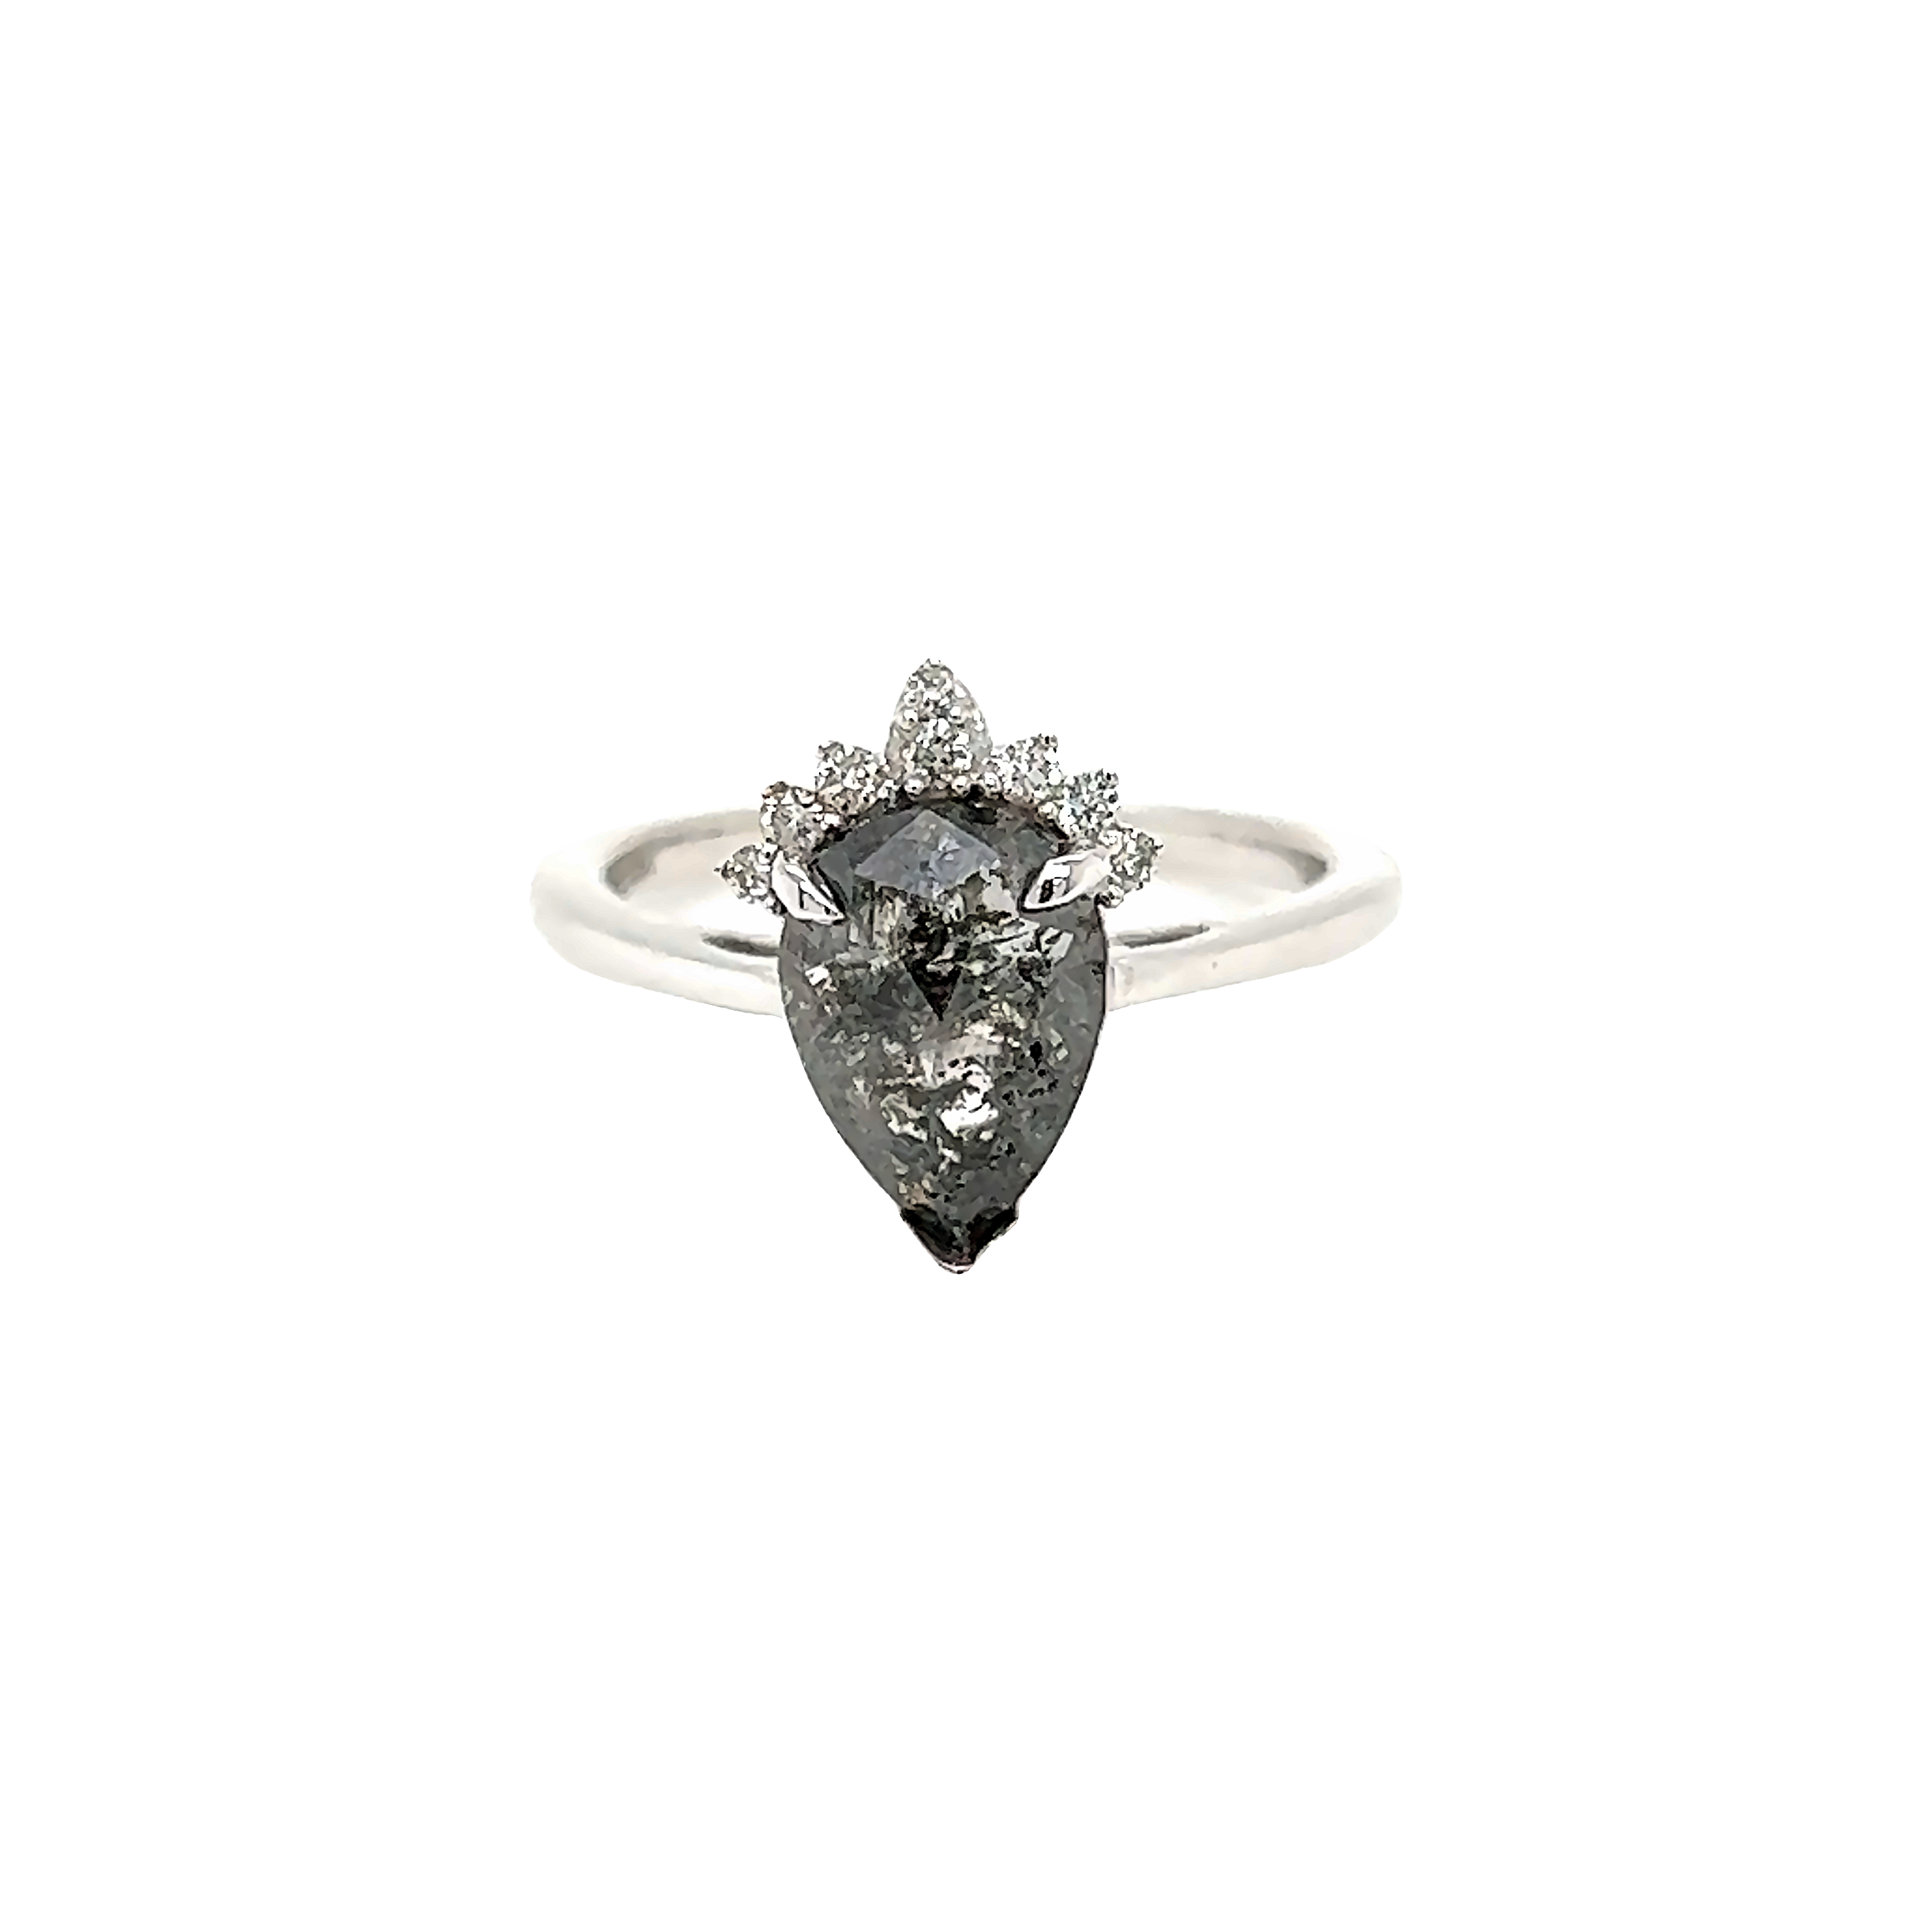 14k White gold ring with one 1.5ct Salt and Pepper pear shaped diamond center and 9=.17ct accent diamonds